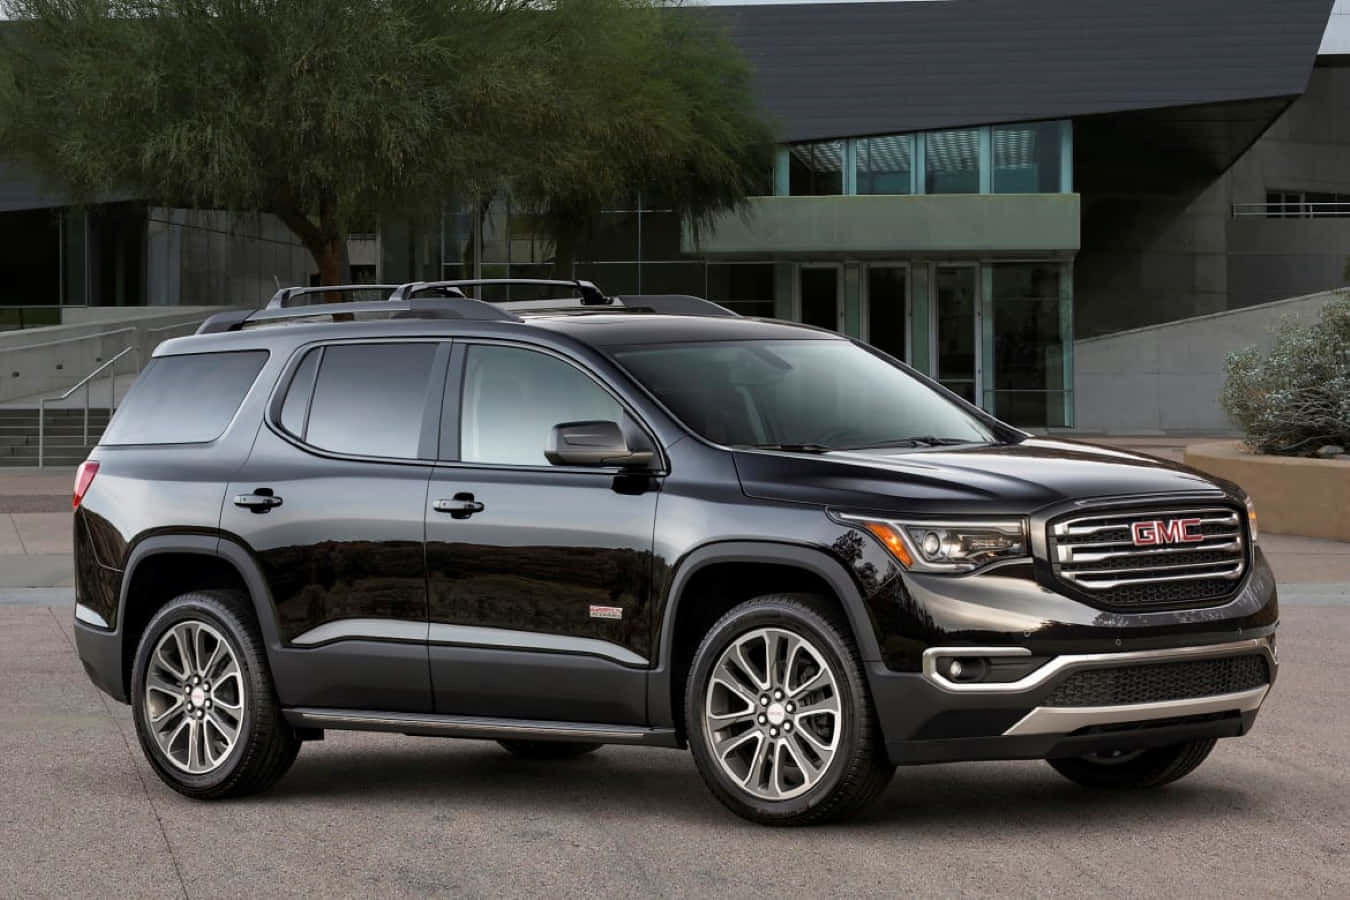 A Stunning GMC Acadia in a Dynamic Outdoor Setting Wallpaper